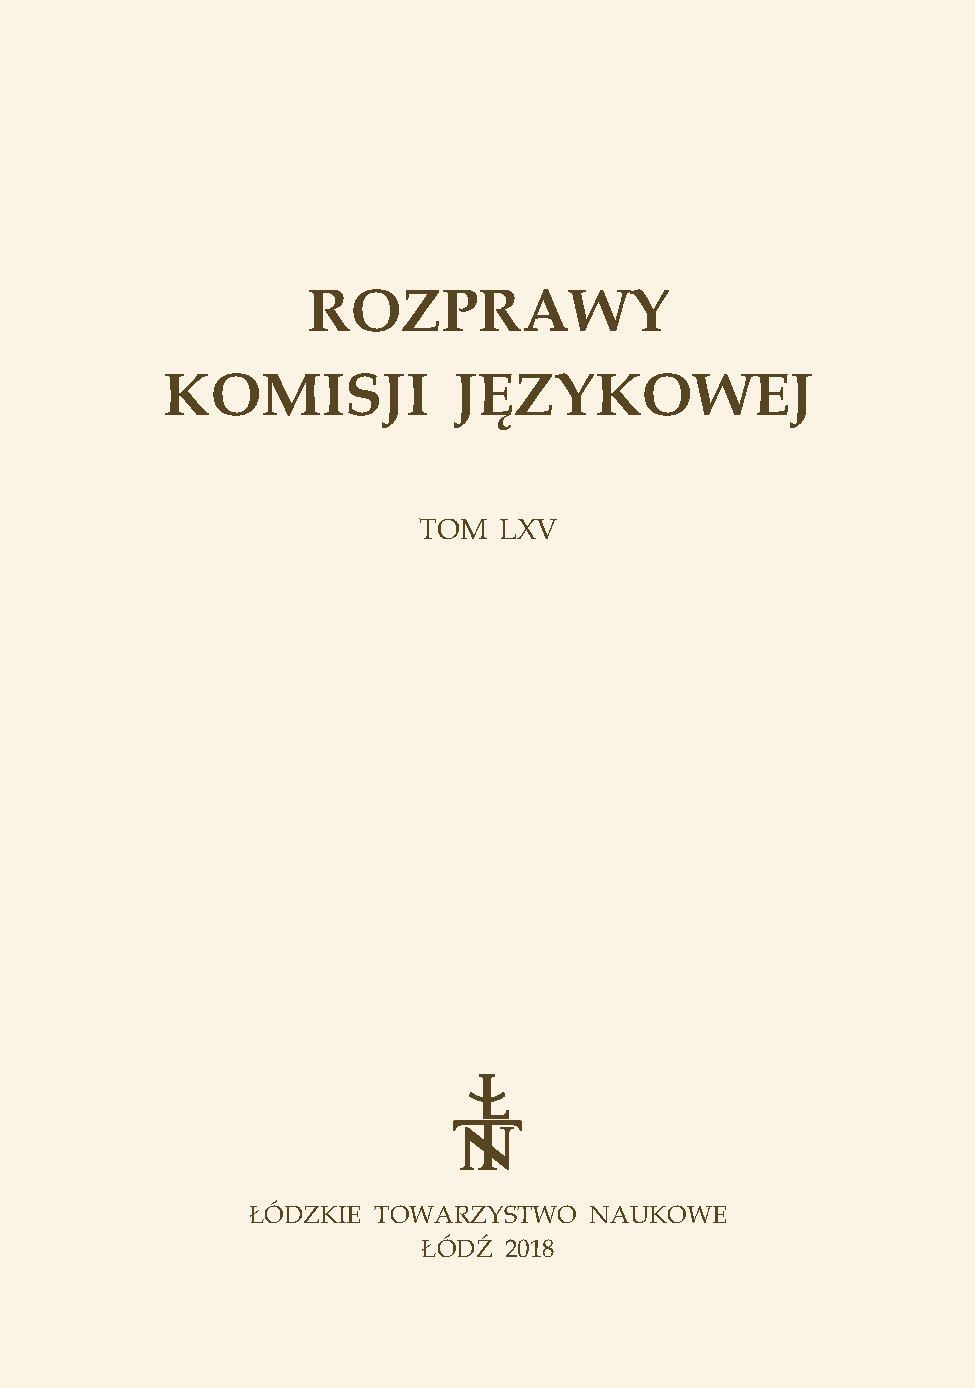 What do we know about Polish language in the “Belarussian Polesie” area, based on the novel ”Puszcza” by Józef Weyssenhoff? Cover Image